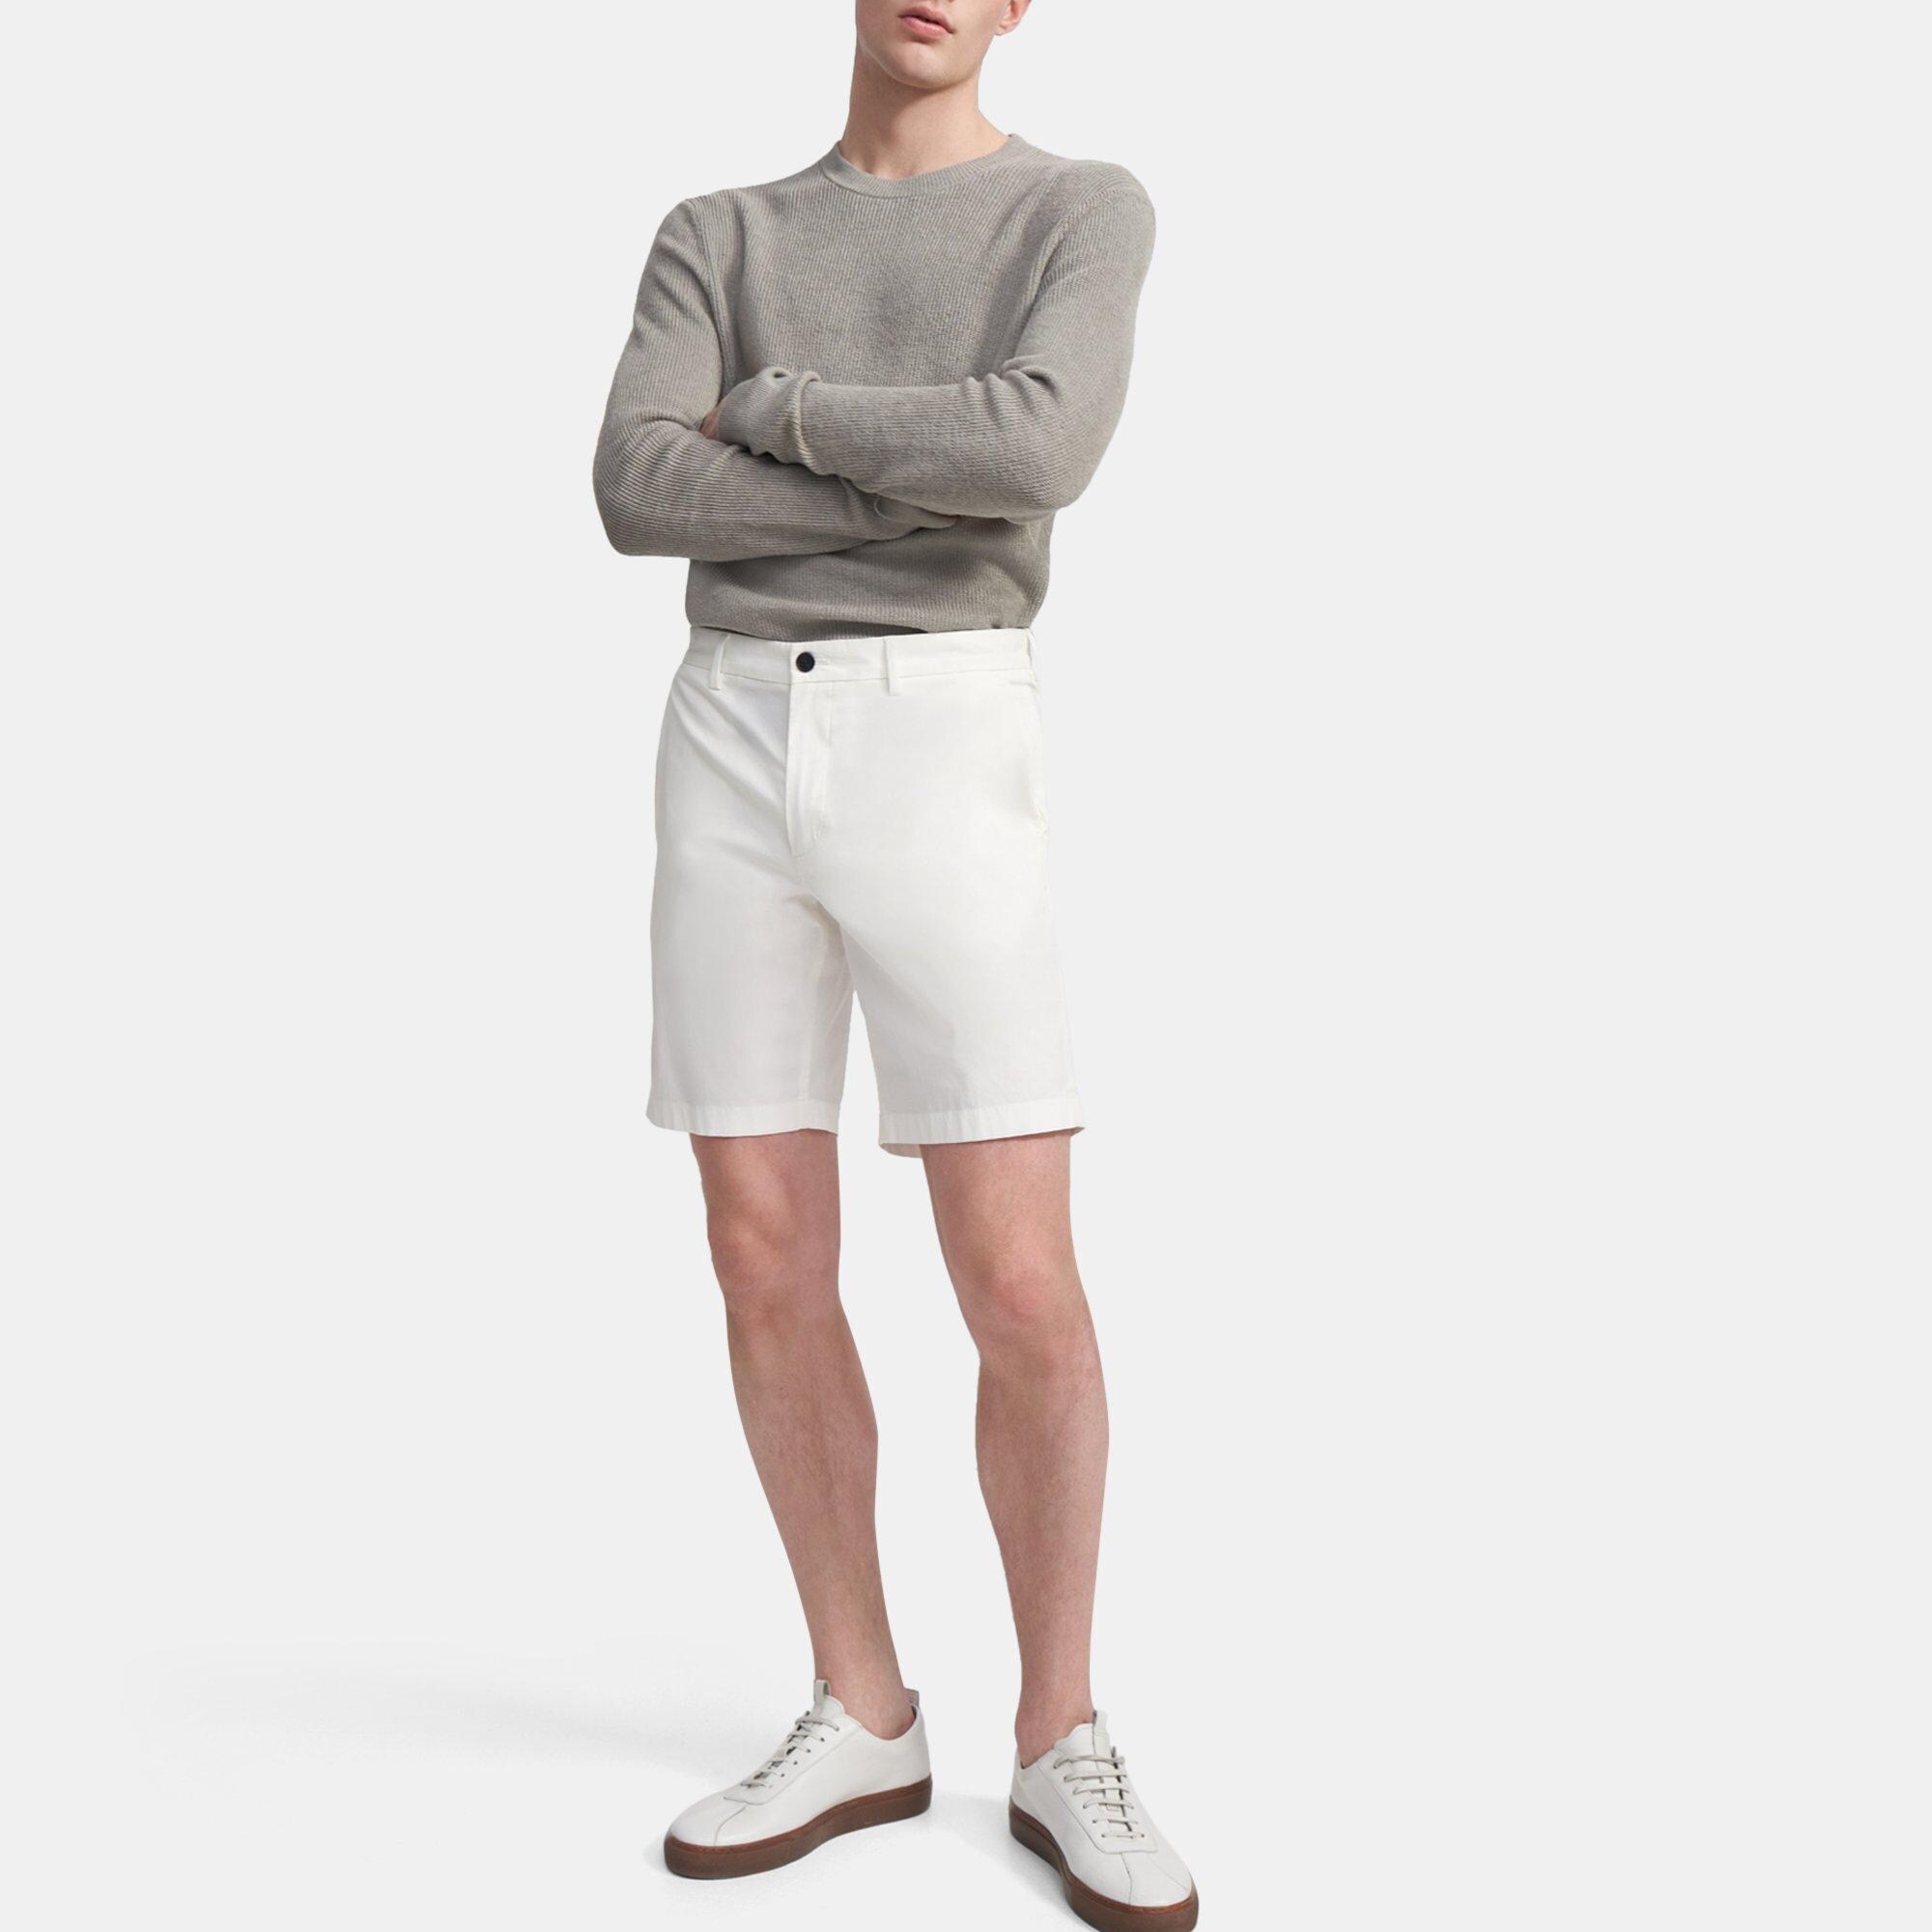 Theory Classic-Fit Short in Garment Dyed Cotton